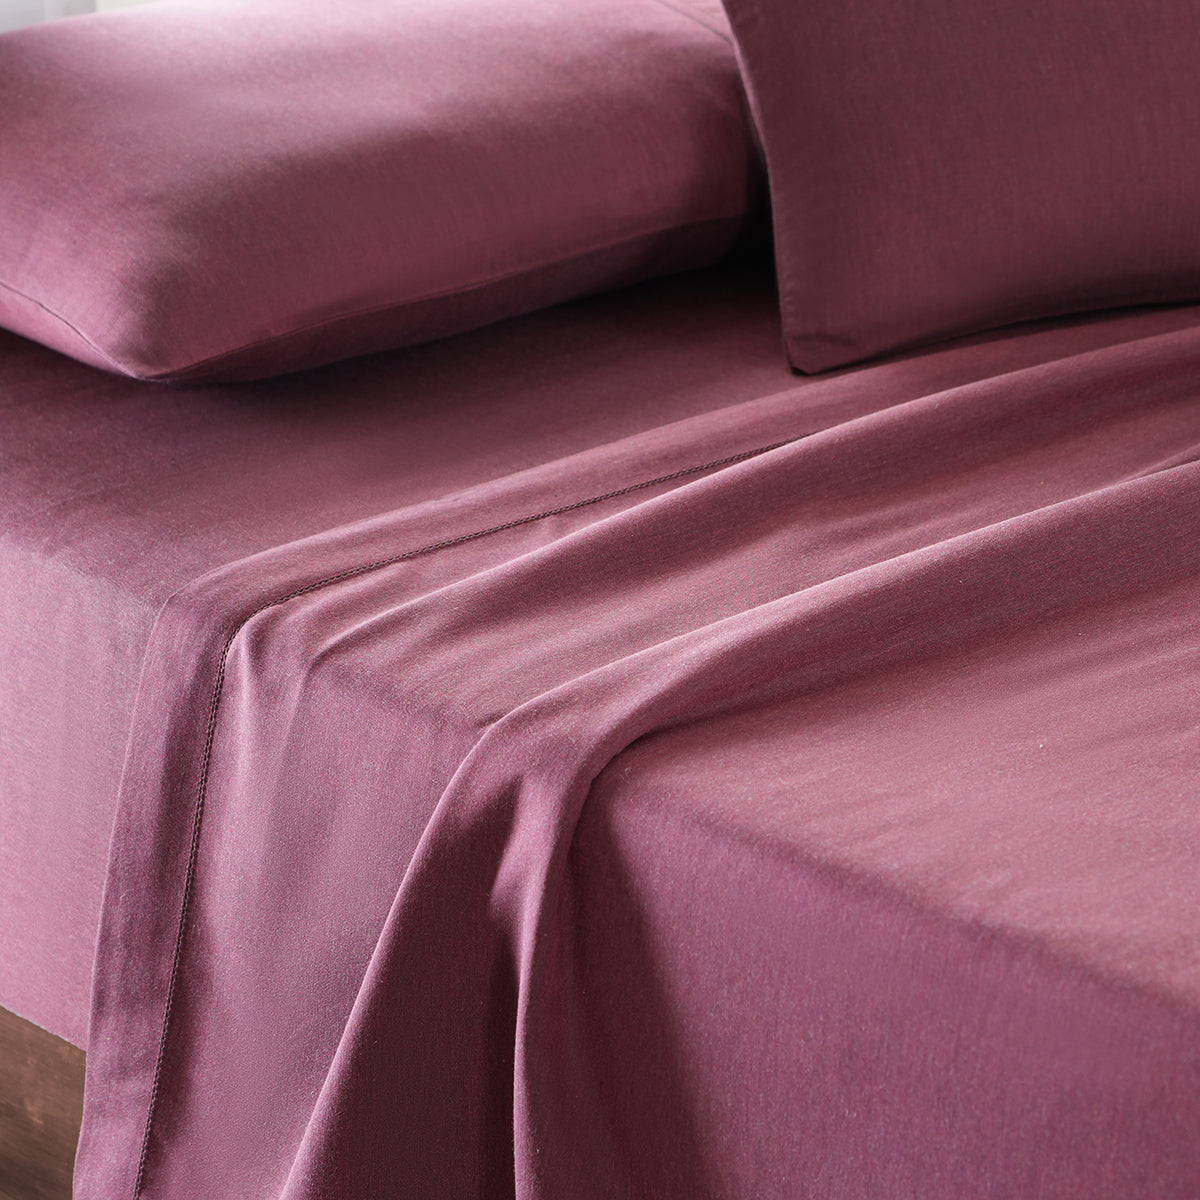 Emmie Made With Egyptian Cotton Ultra Soft Red Bed Sheet